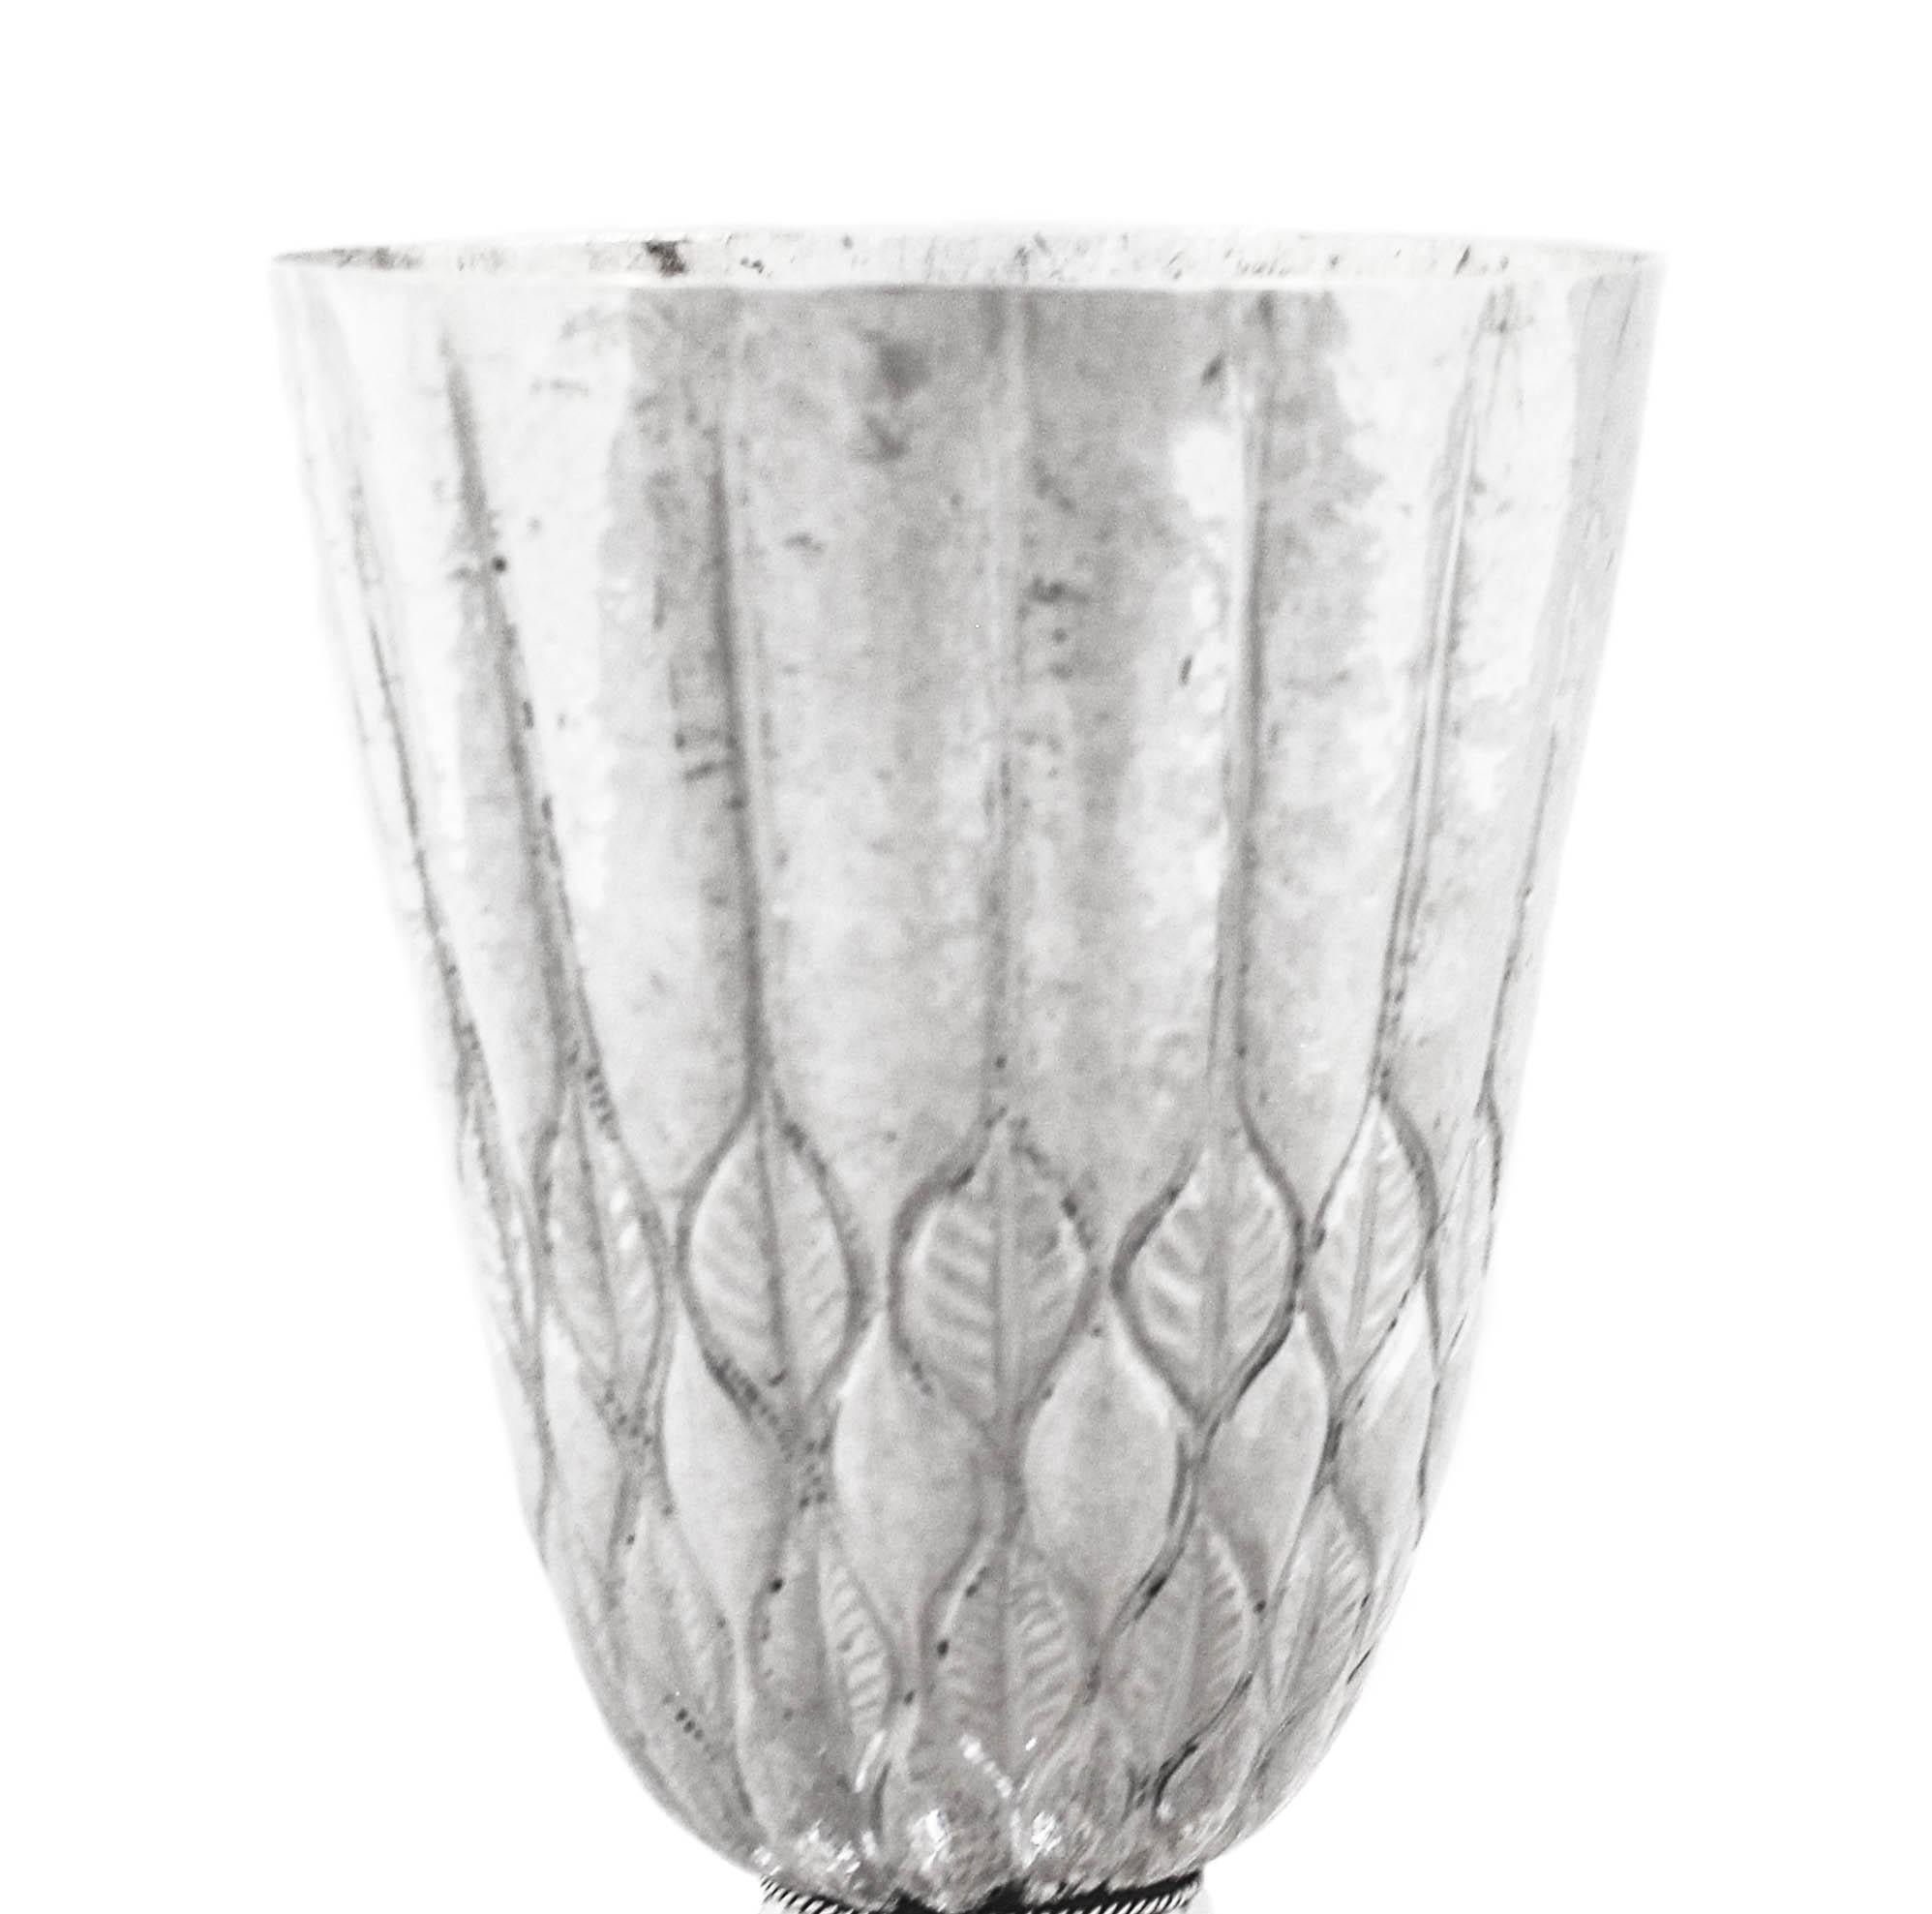 Being offered is a spectacular sterling silver antique chalice made in Austria. It has hand-wrought and hammered.